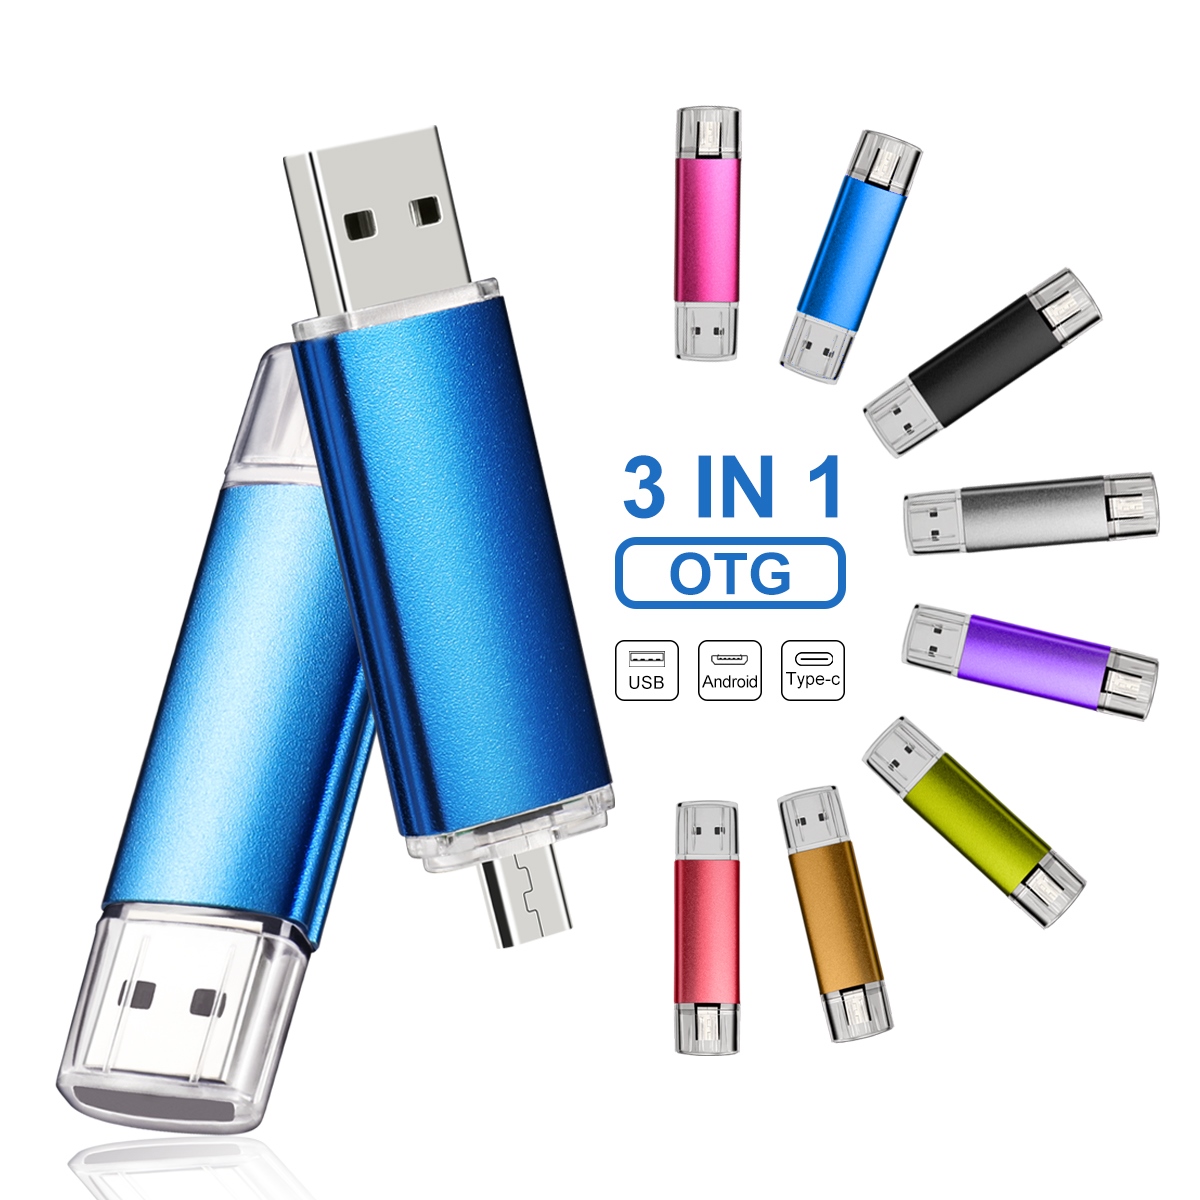 MOVESPEED Portable USB Flash Drive High Speed Pen Drive